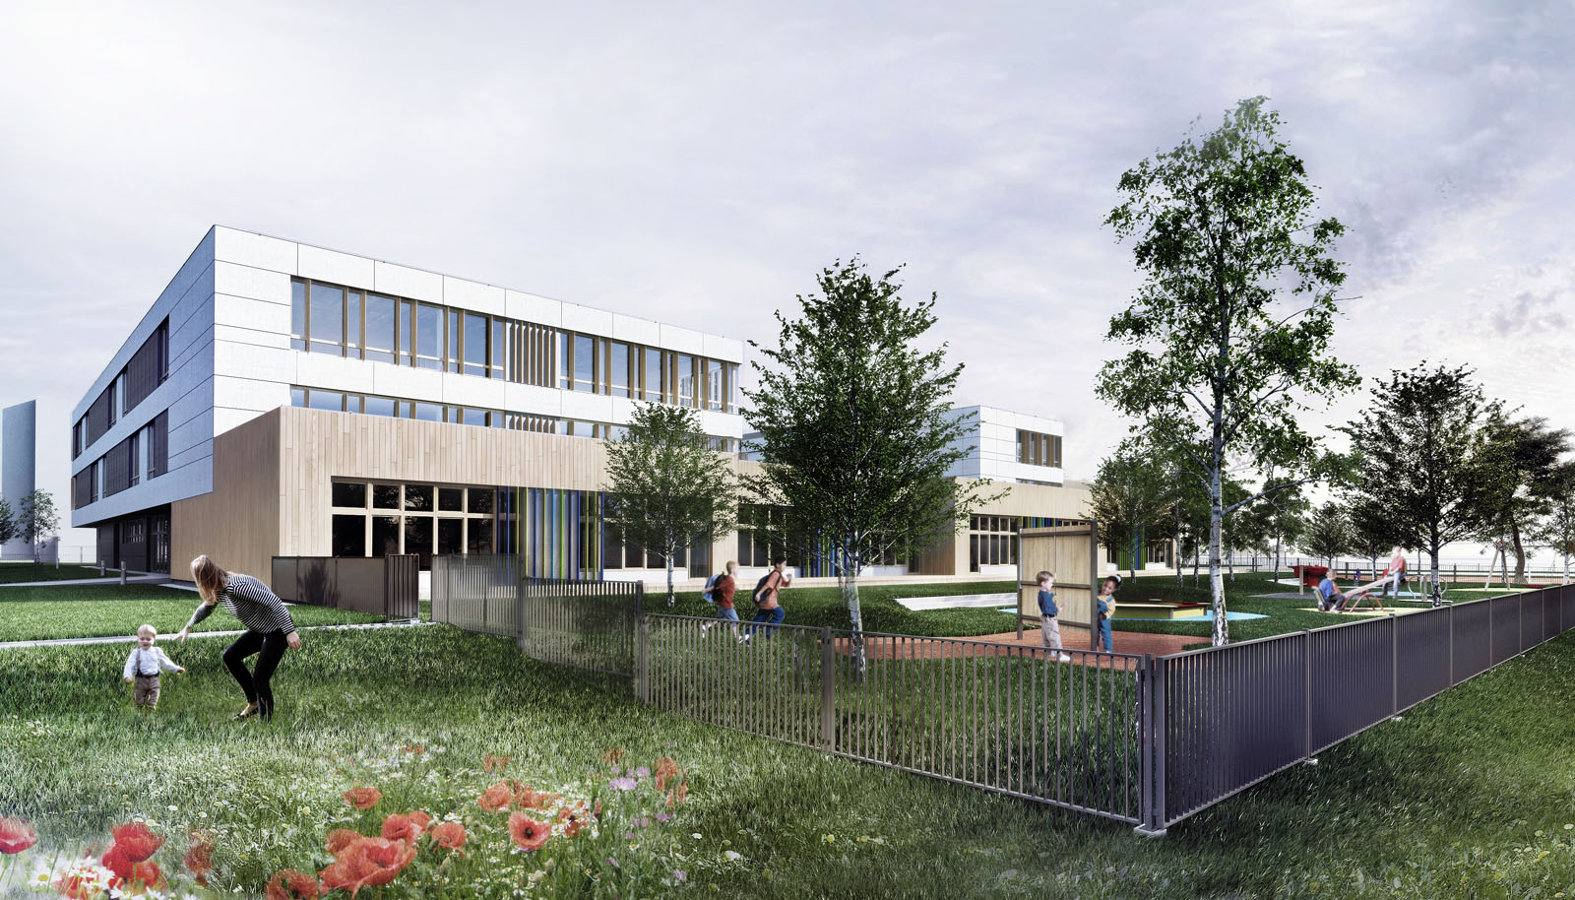 Building permission for Nuresry and Primary School in Wroclaw!